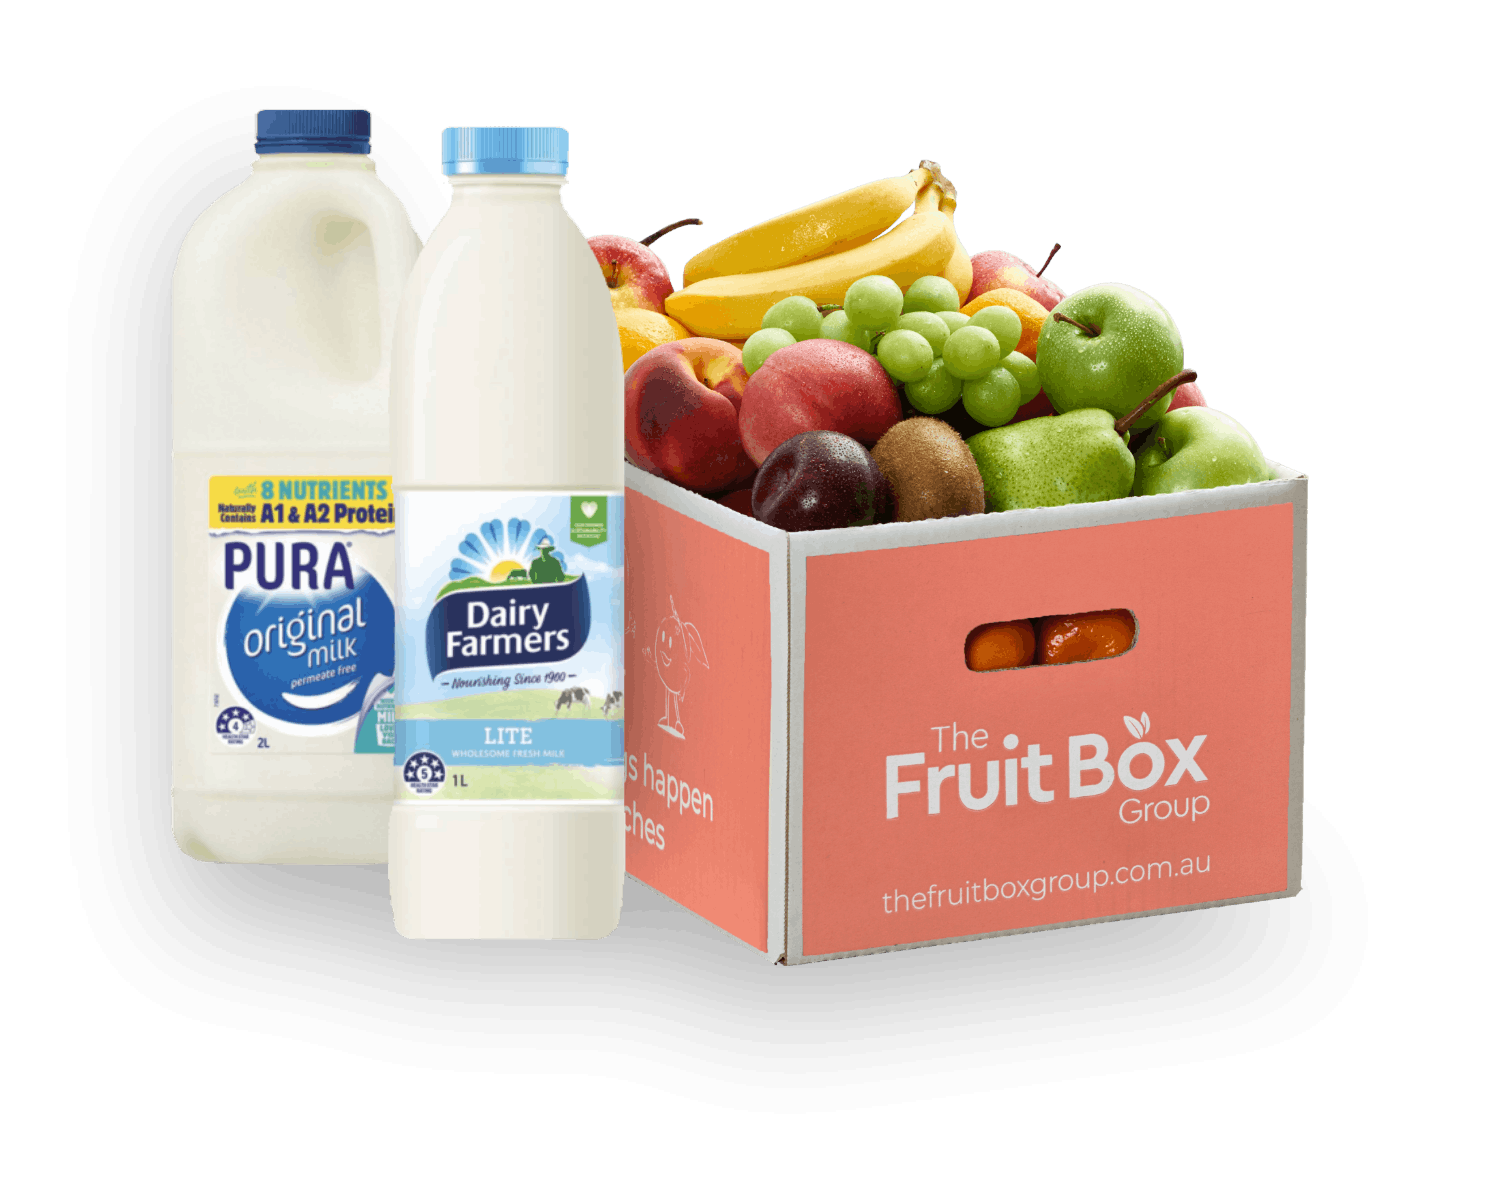 Milk bottles and a box with a range of fruits